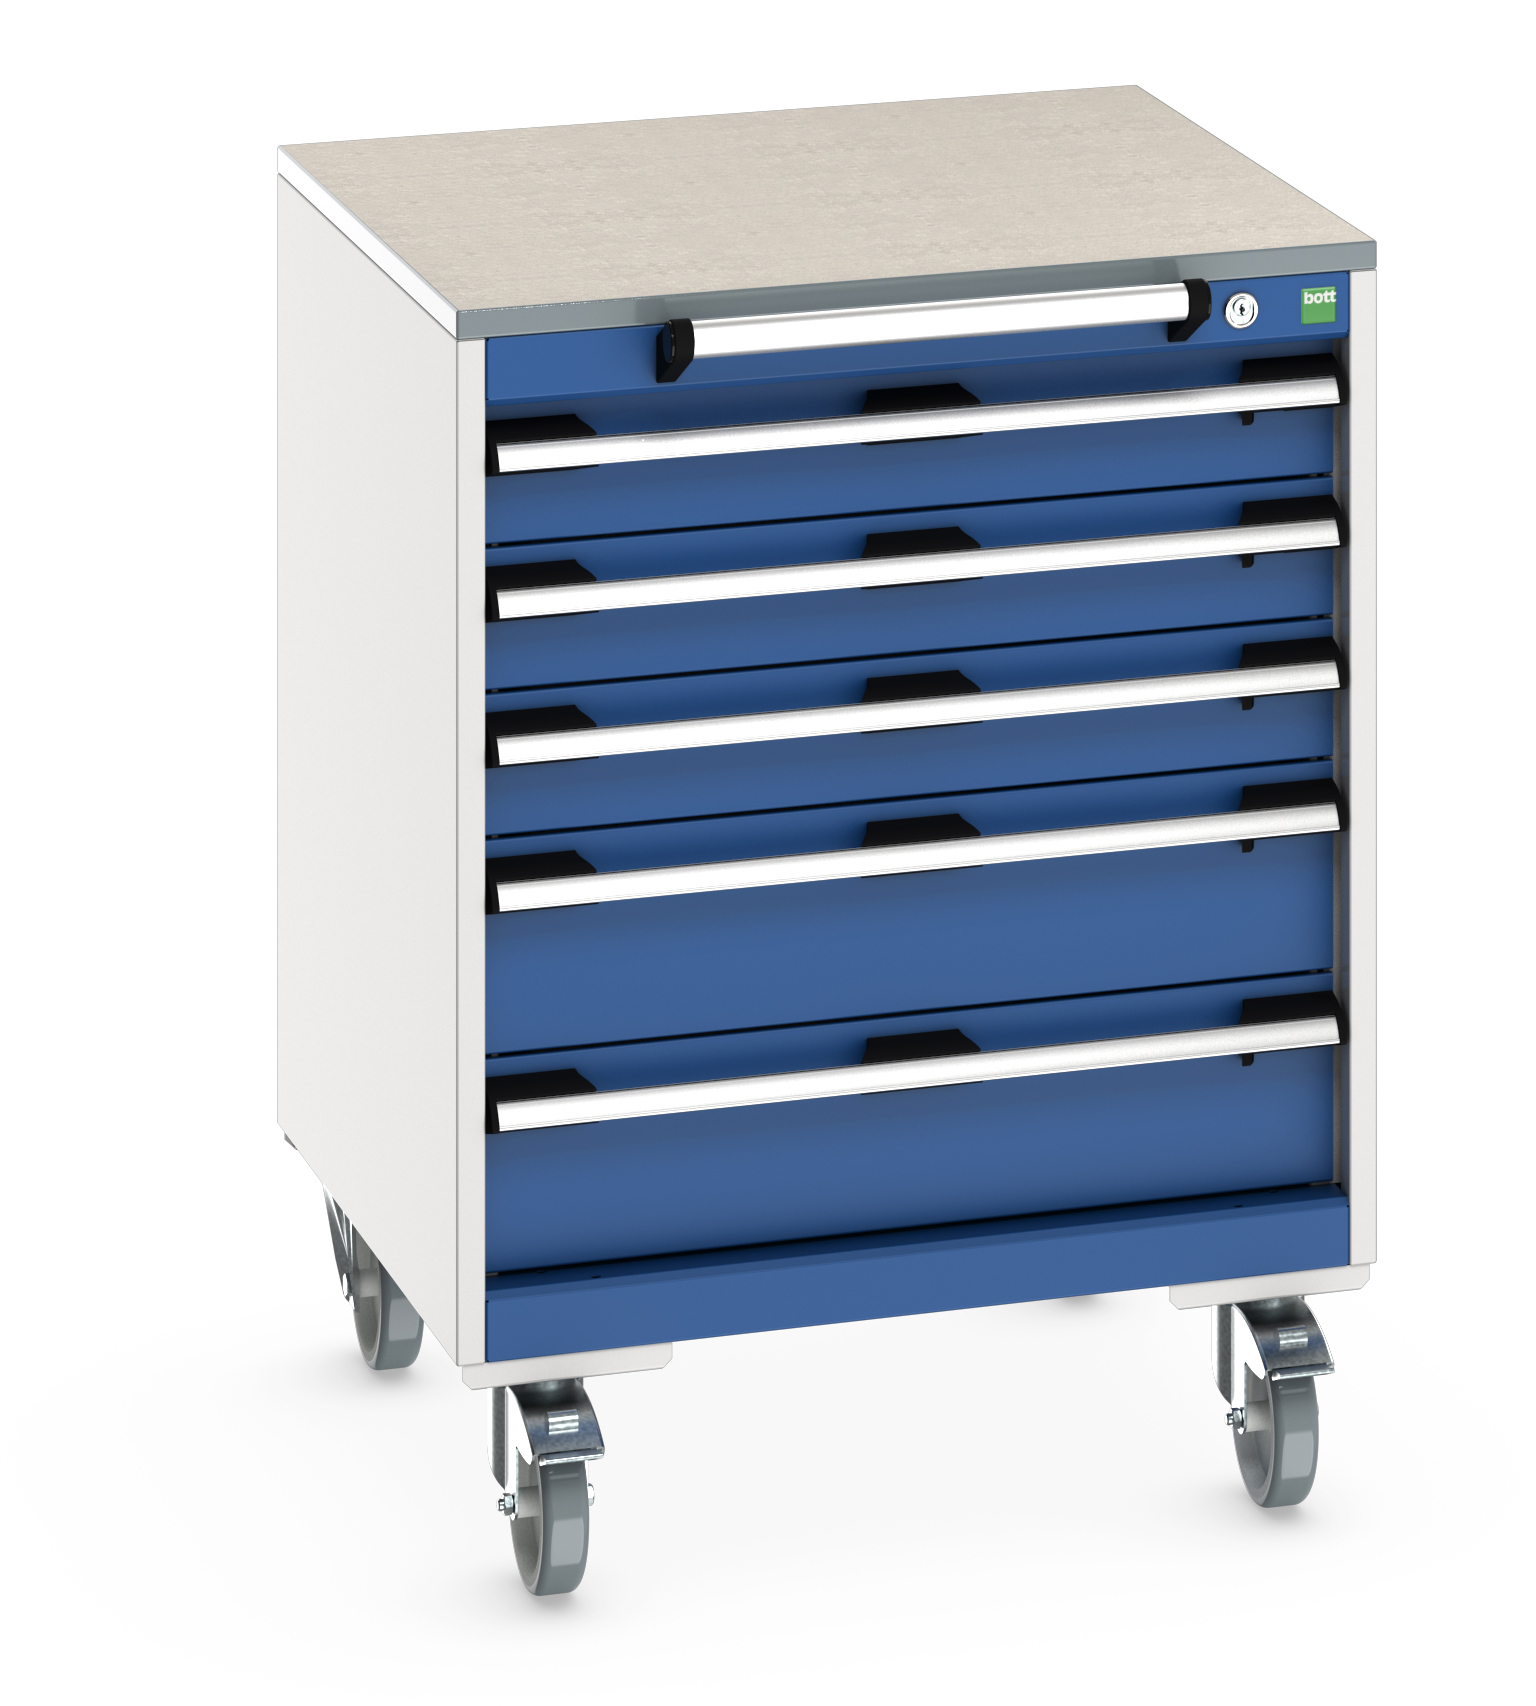 Bott Cubio Mobile Drawer Cabinet With 5 Drawers & Lino Worktop - 40402148.11V